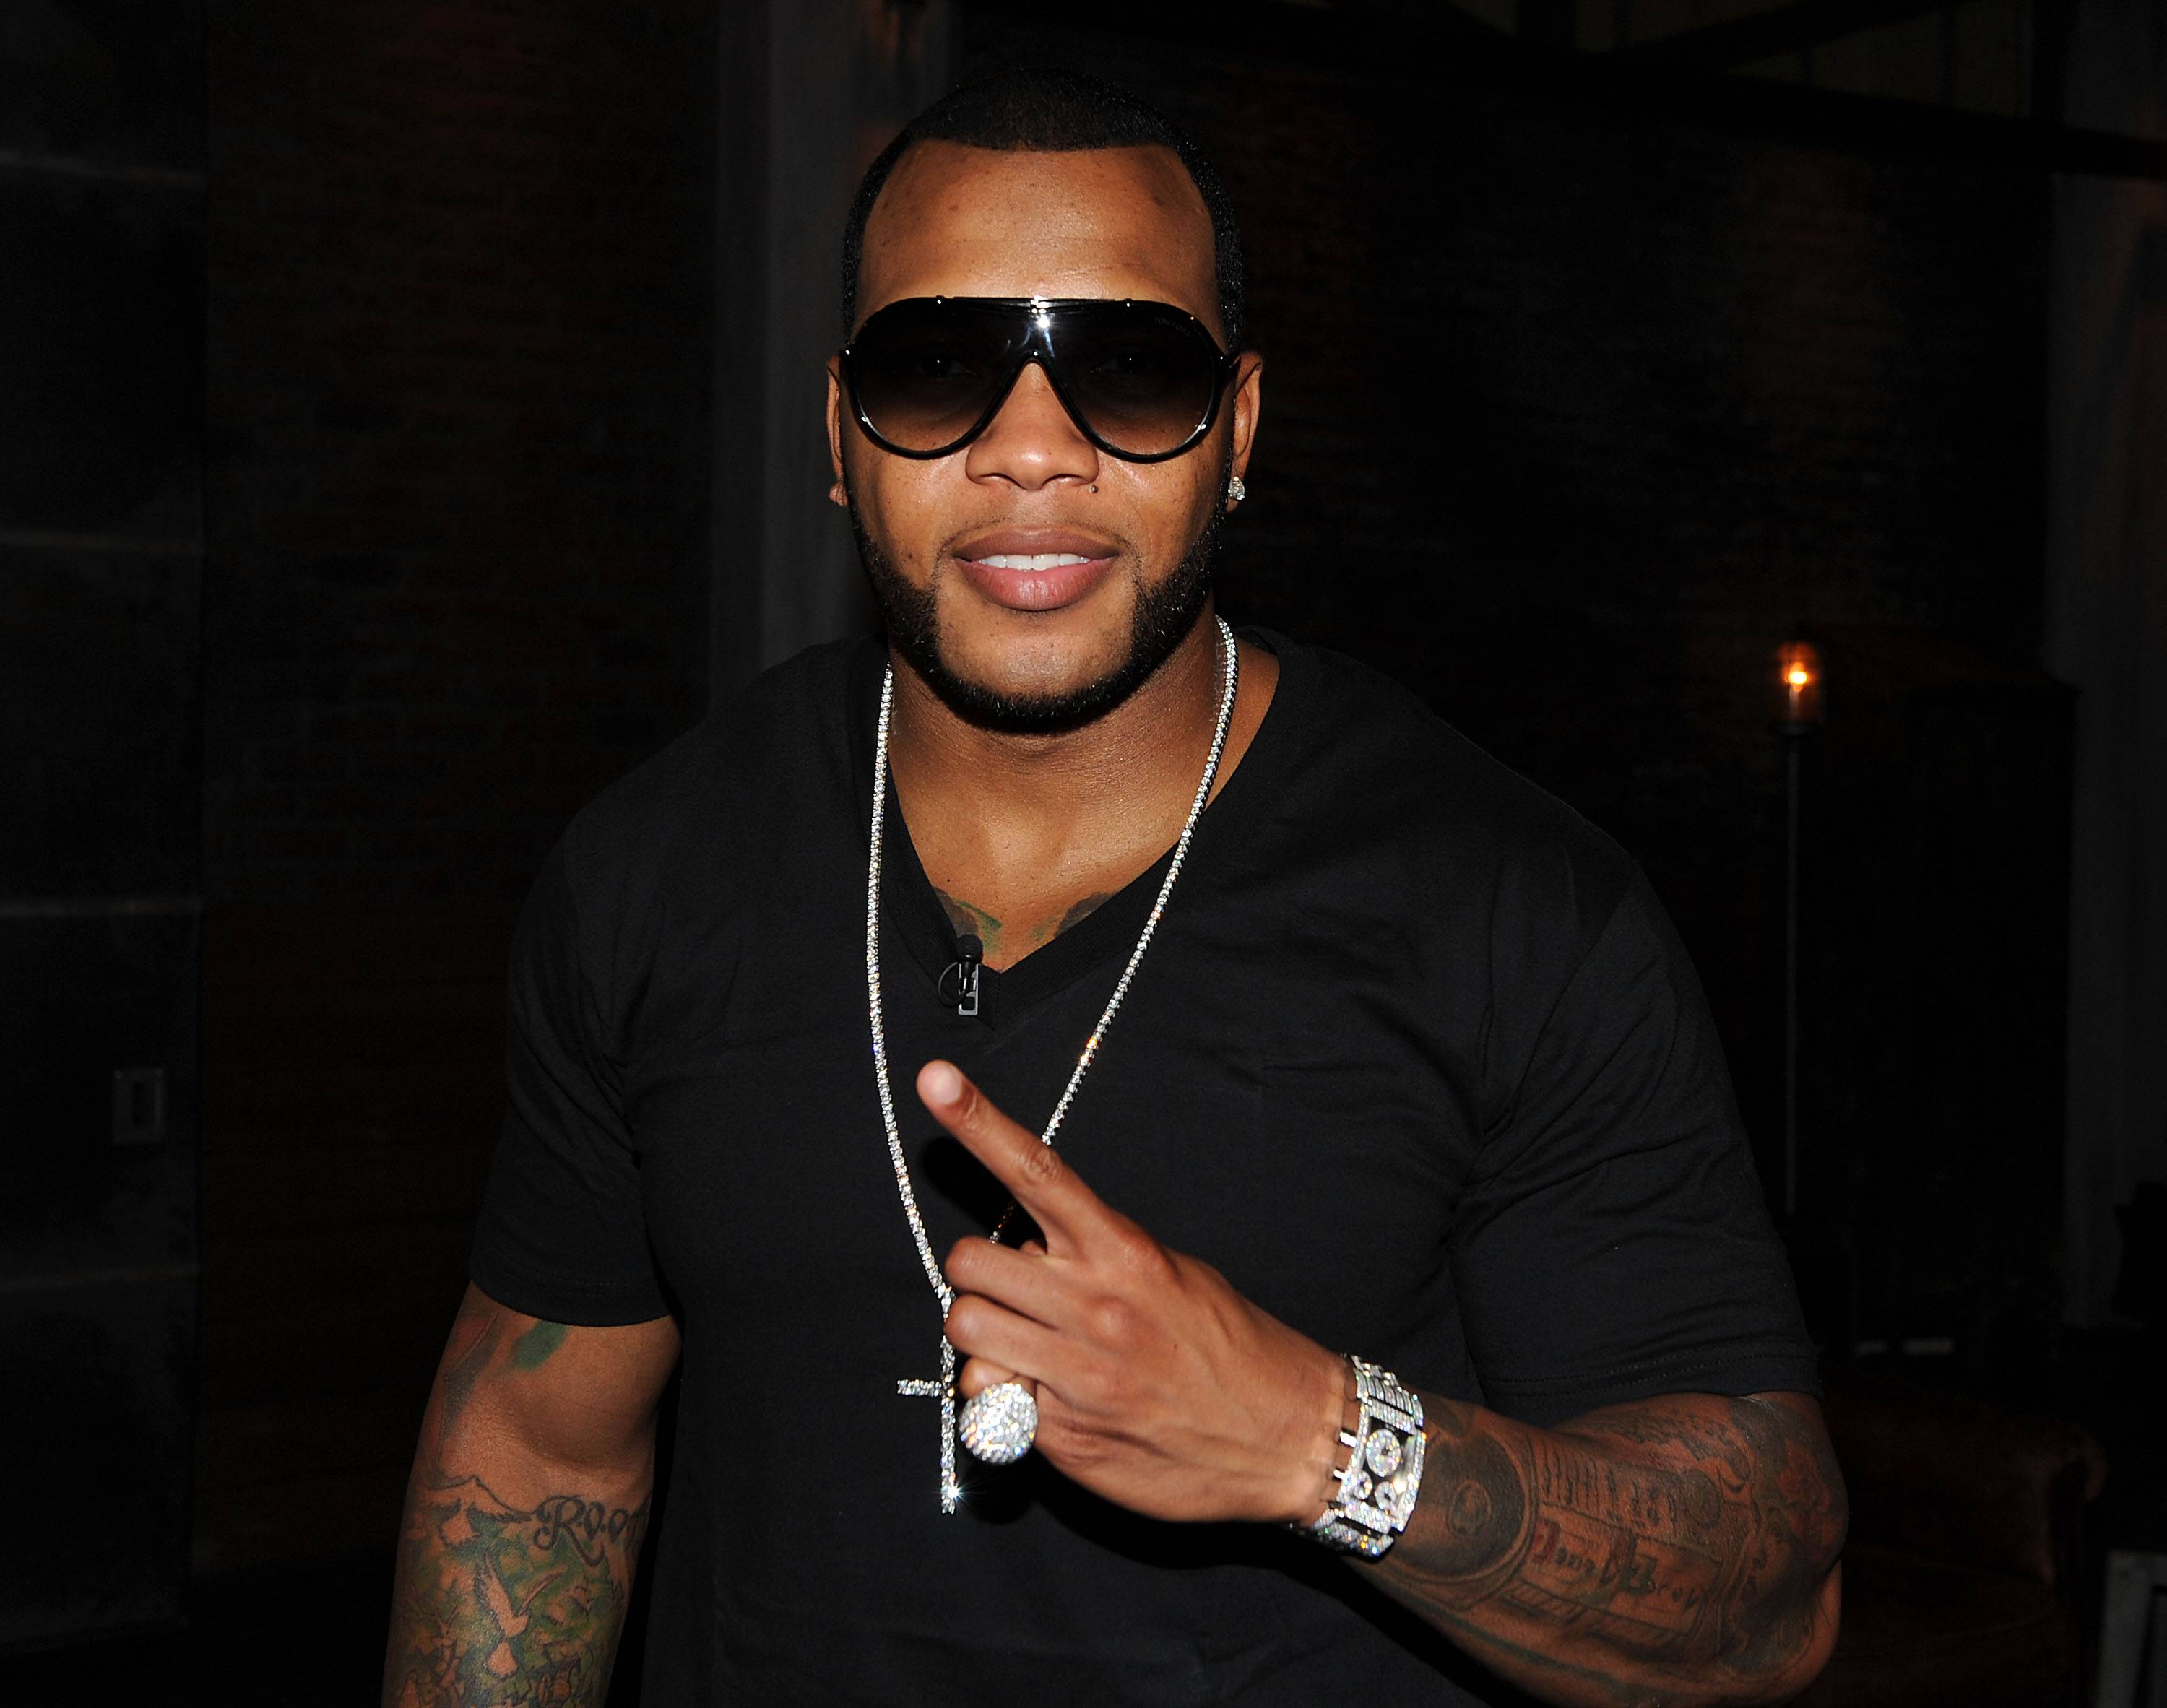 Flo Rida: September 17 - The &quot;Good Feeling&quot; rapper turns 32.(Photo: Andrew H. Walker/Getty Images)